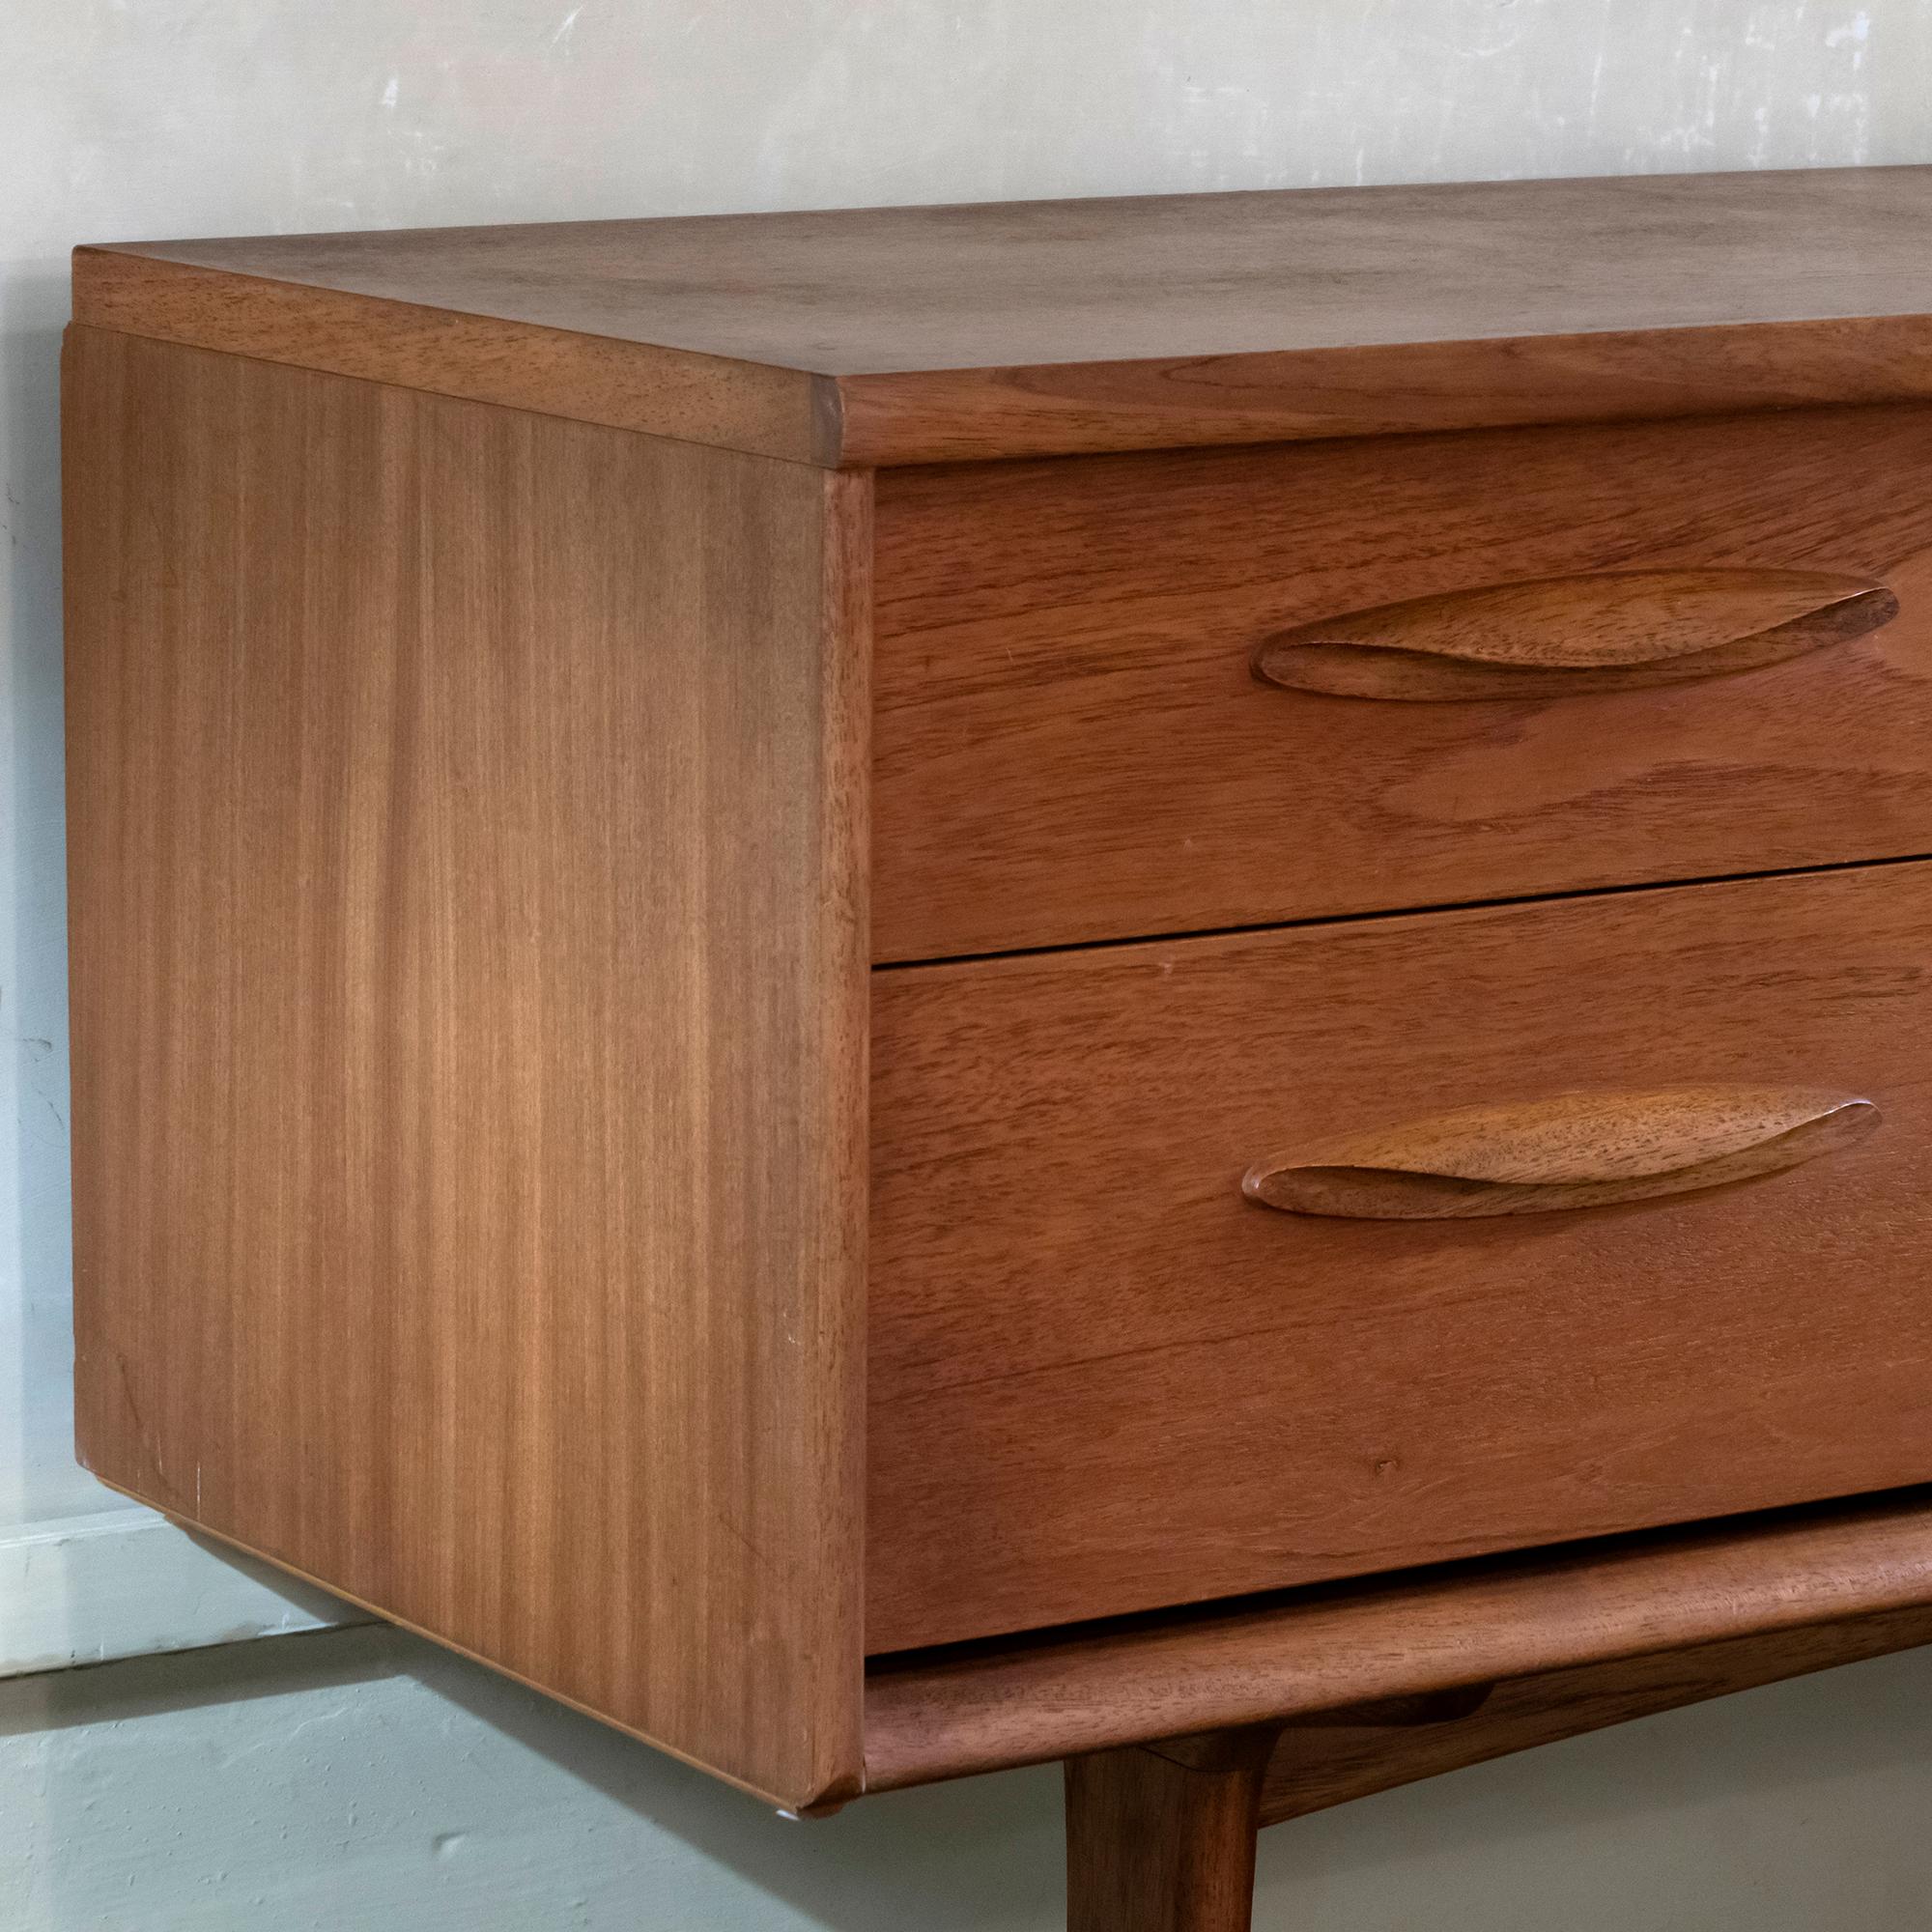 1960s English Teak Chest of Drawers by Austin Suite Ltd For Sale 4